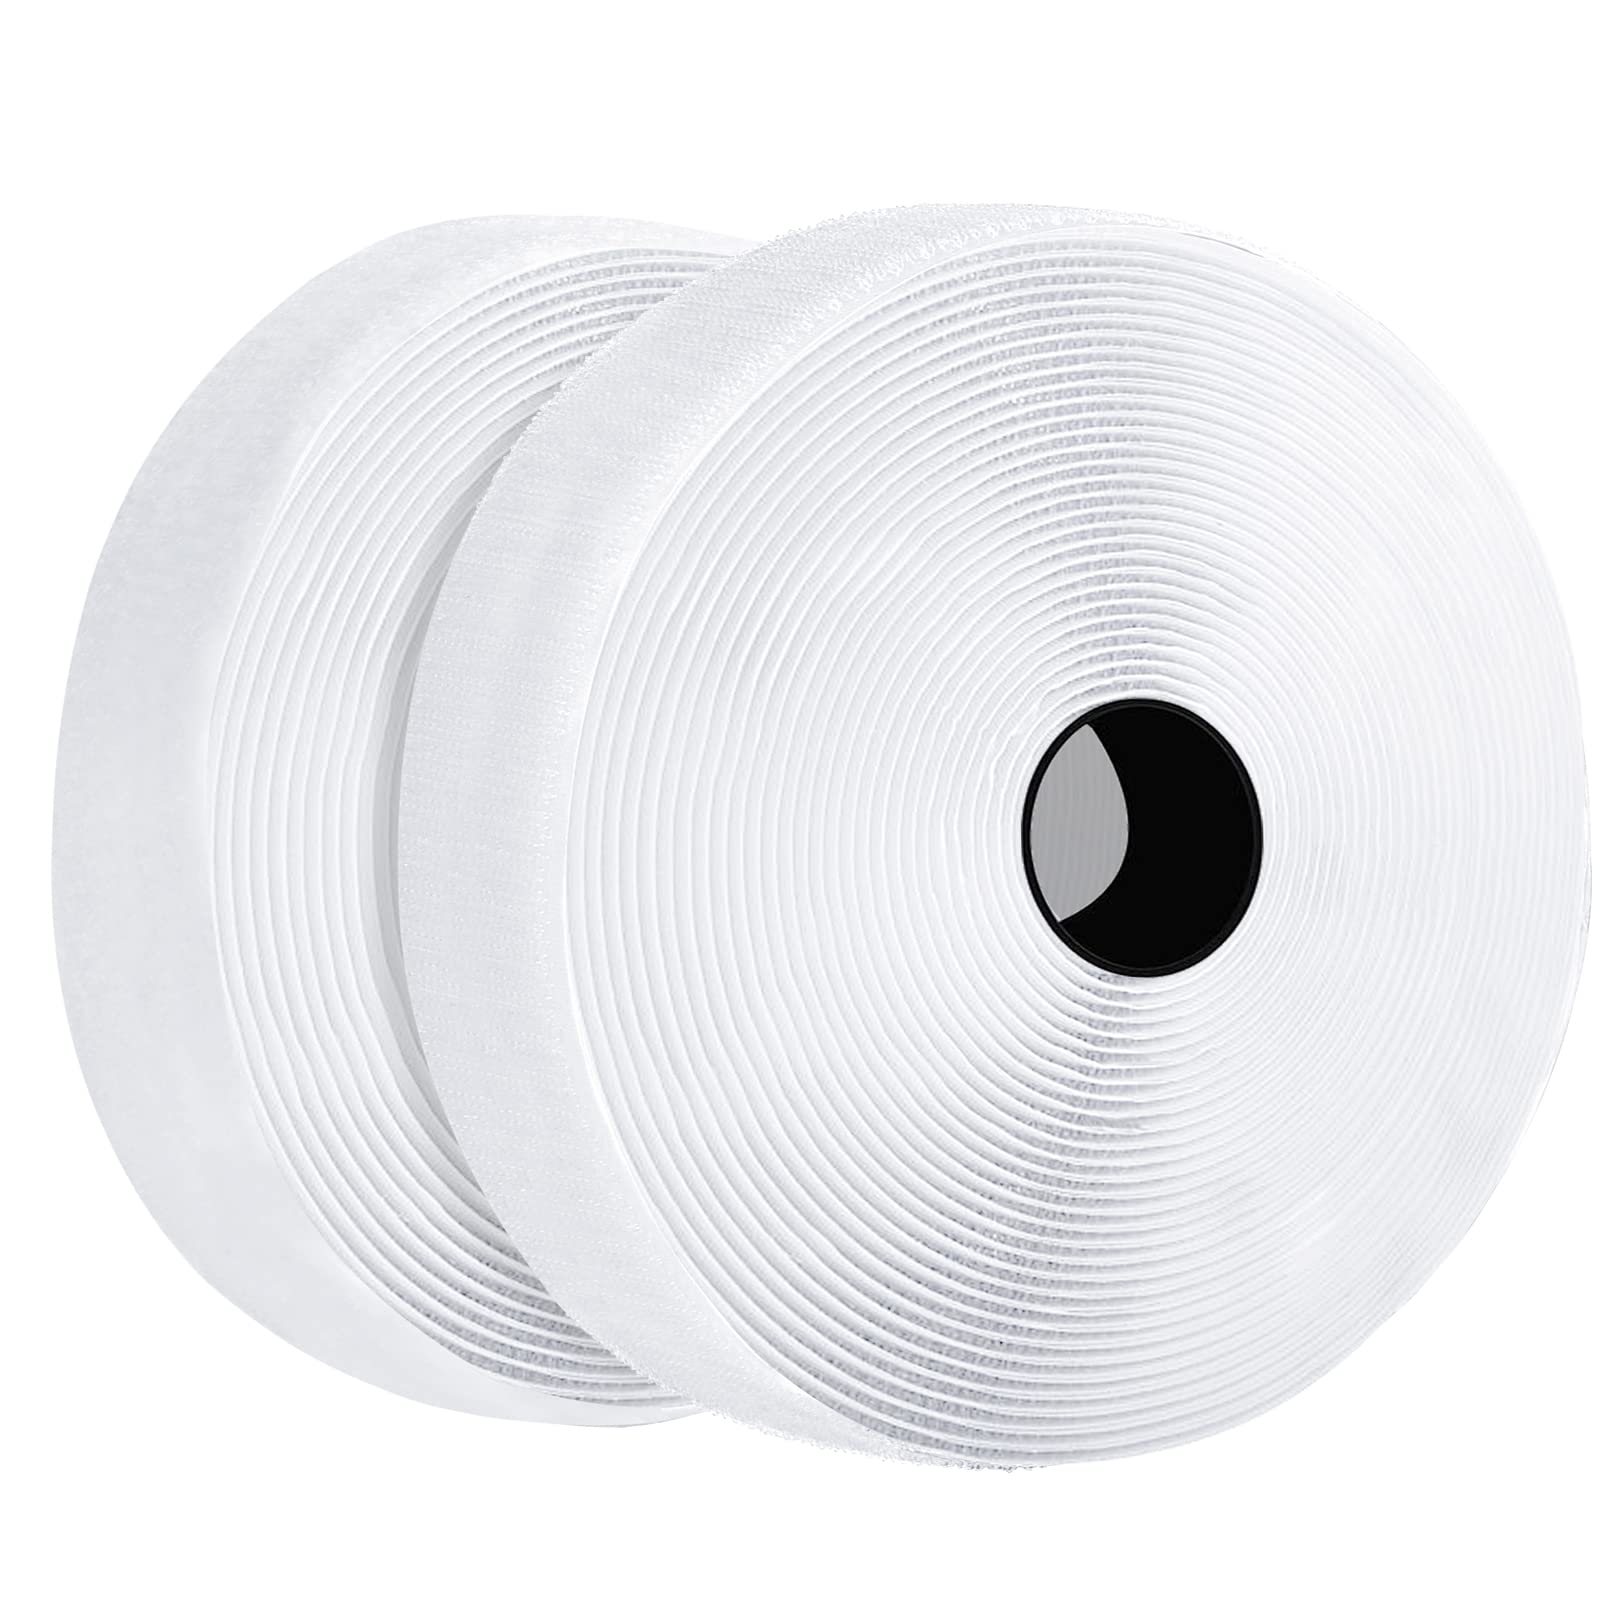 29.5Ft 1-inch Carpet Tape Double Sided, Rug Gripper Tape for